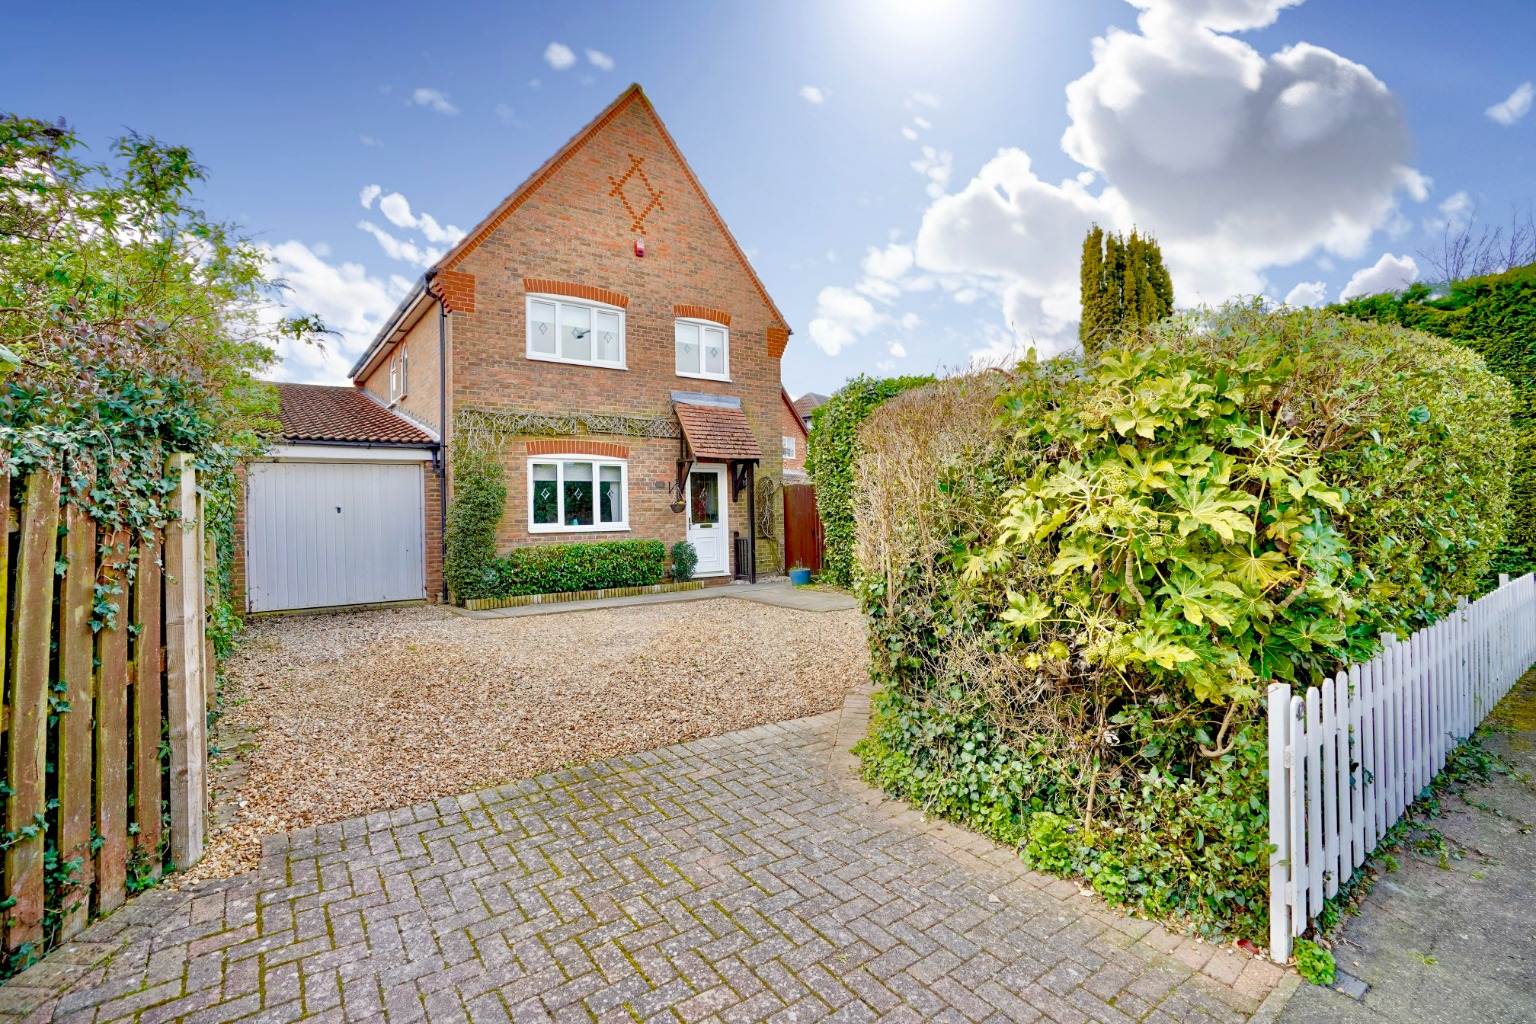 4 bed detached house for sale in Owl Way, Huntingdon  - Property Image 1